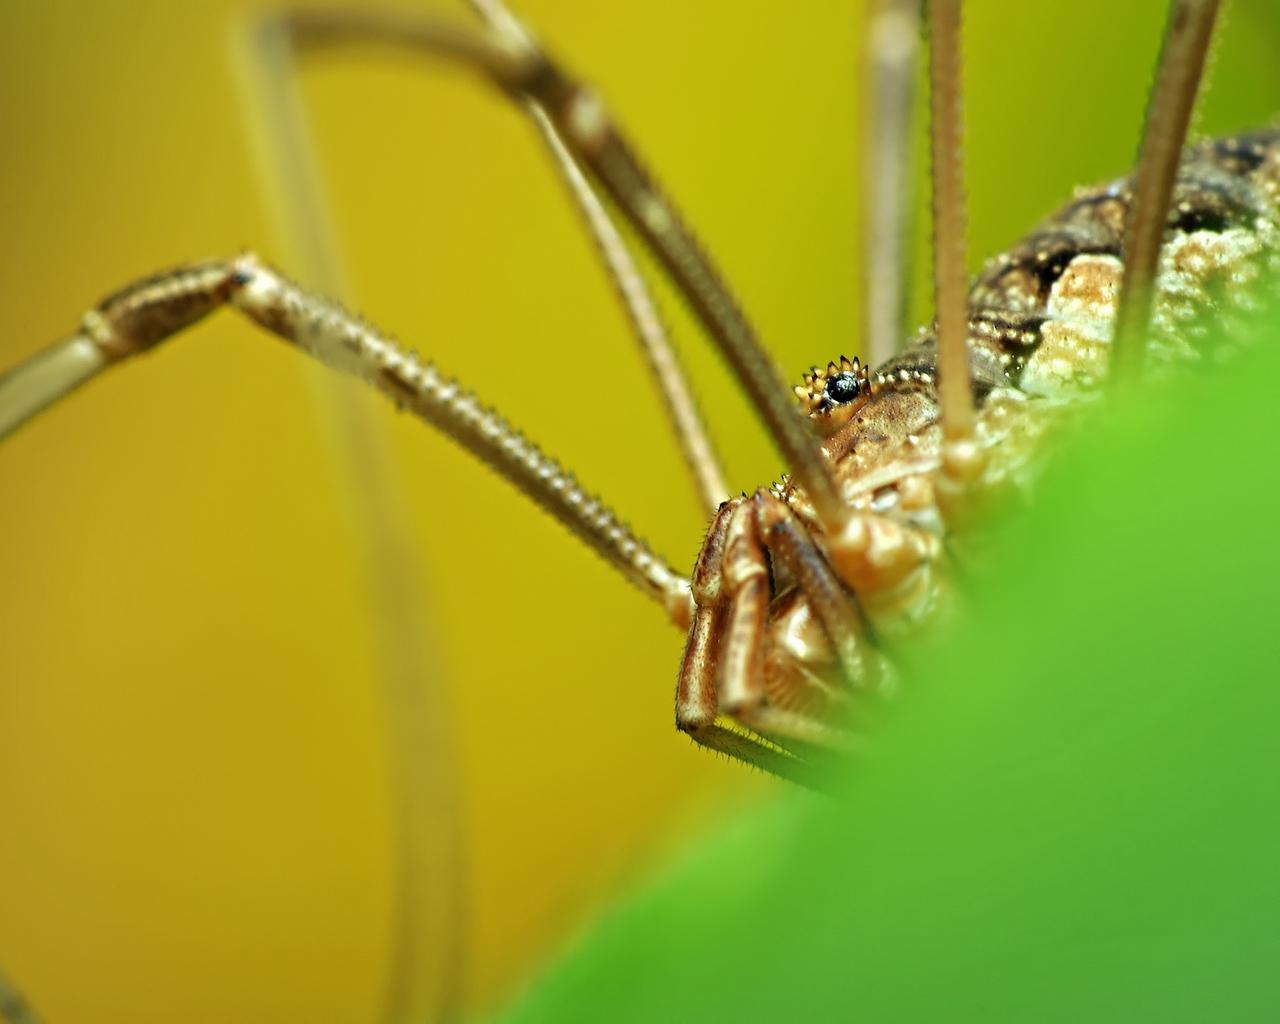 Download wallpaper 1280x1024 spider, legs, insect, grass